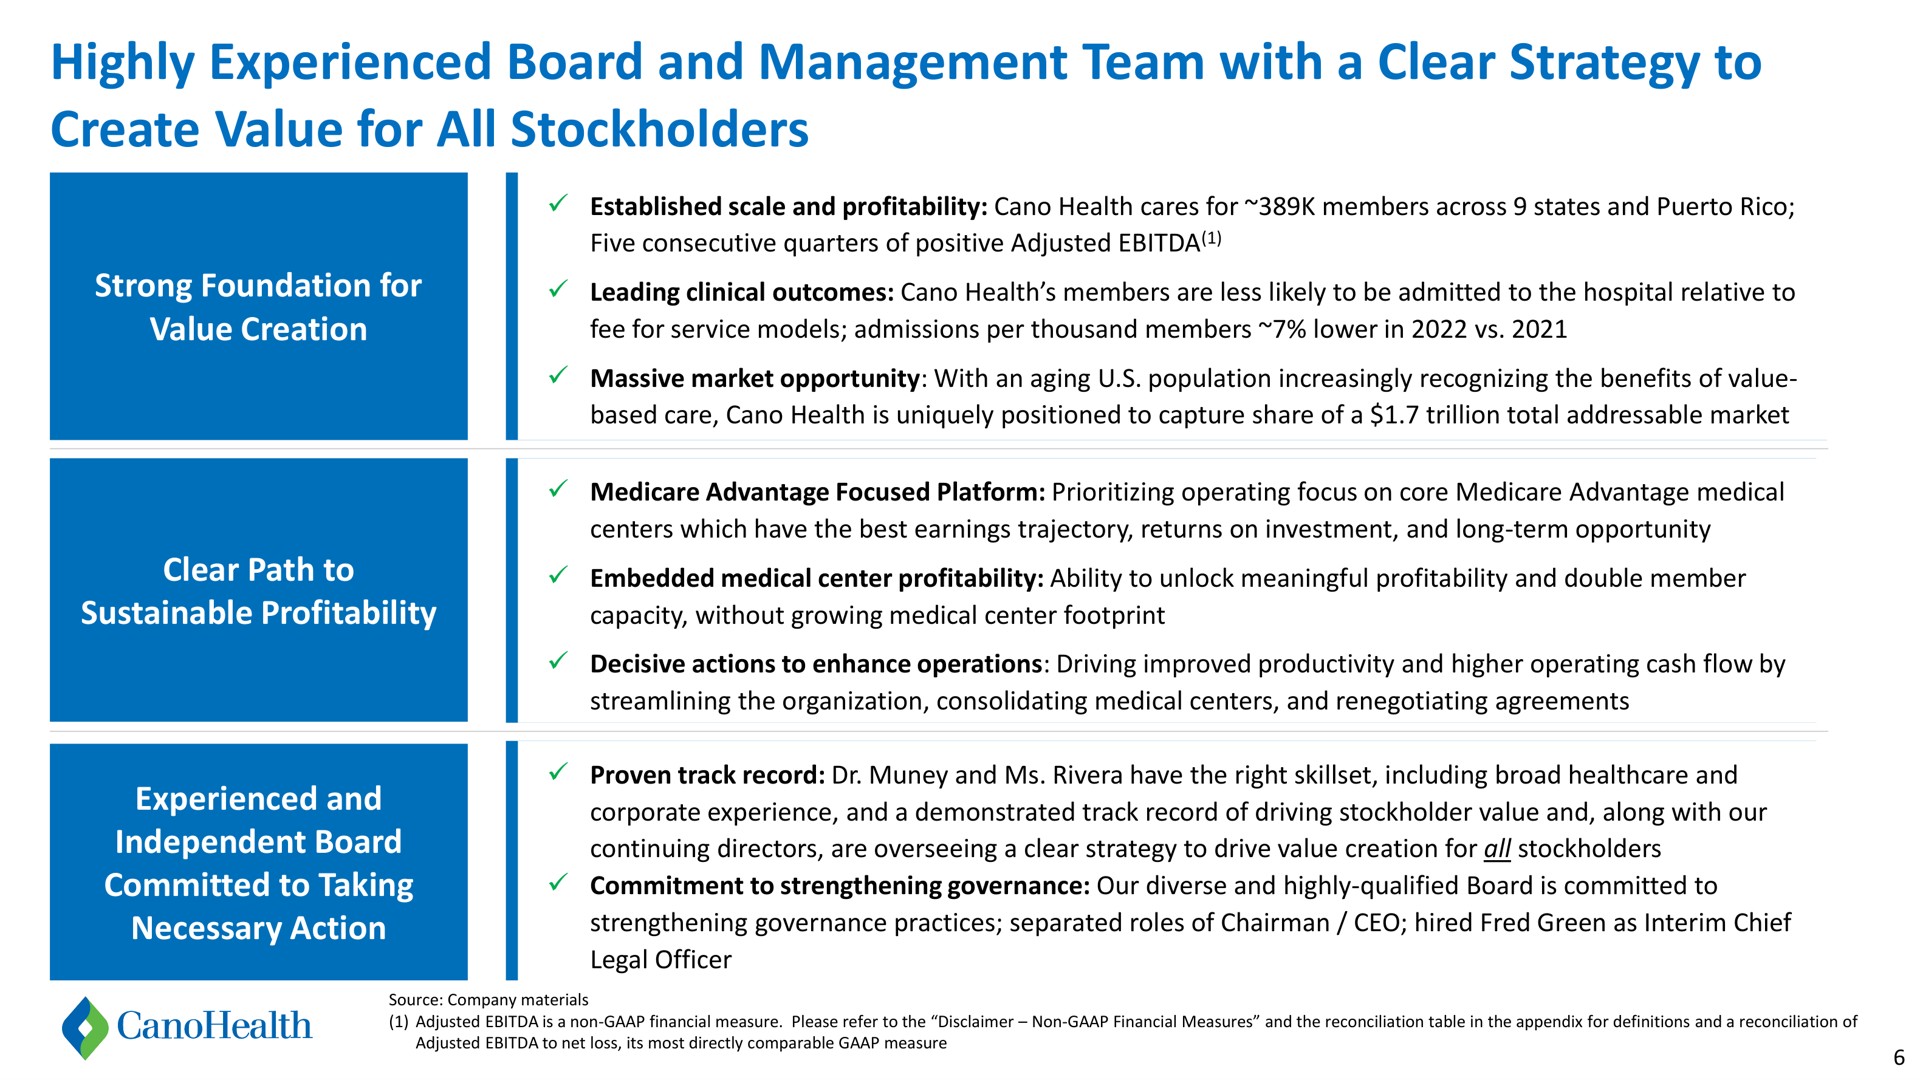 highly experienced board and management team with a clear strategy to create value for all stockholders | Cano Health